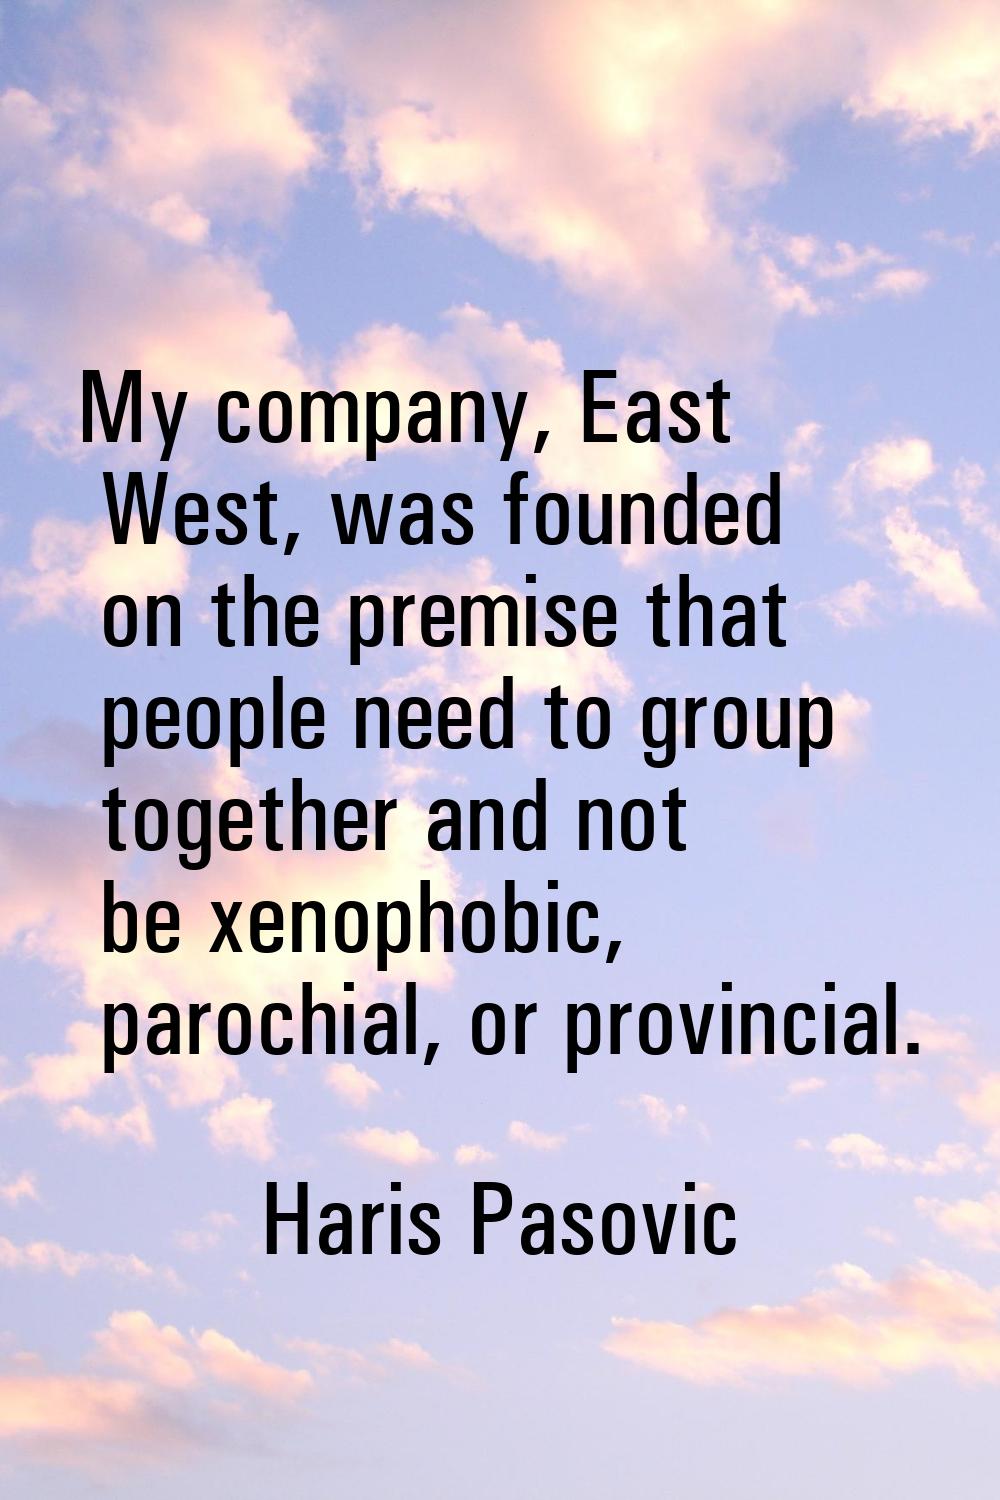 My company, East West, was founded on the premise that people need to group together and not be xen